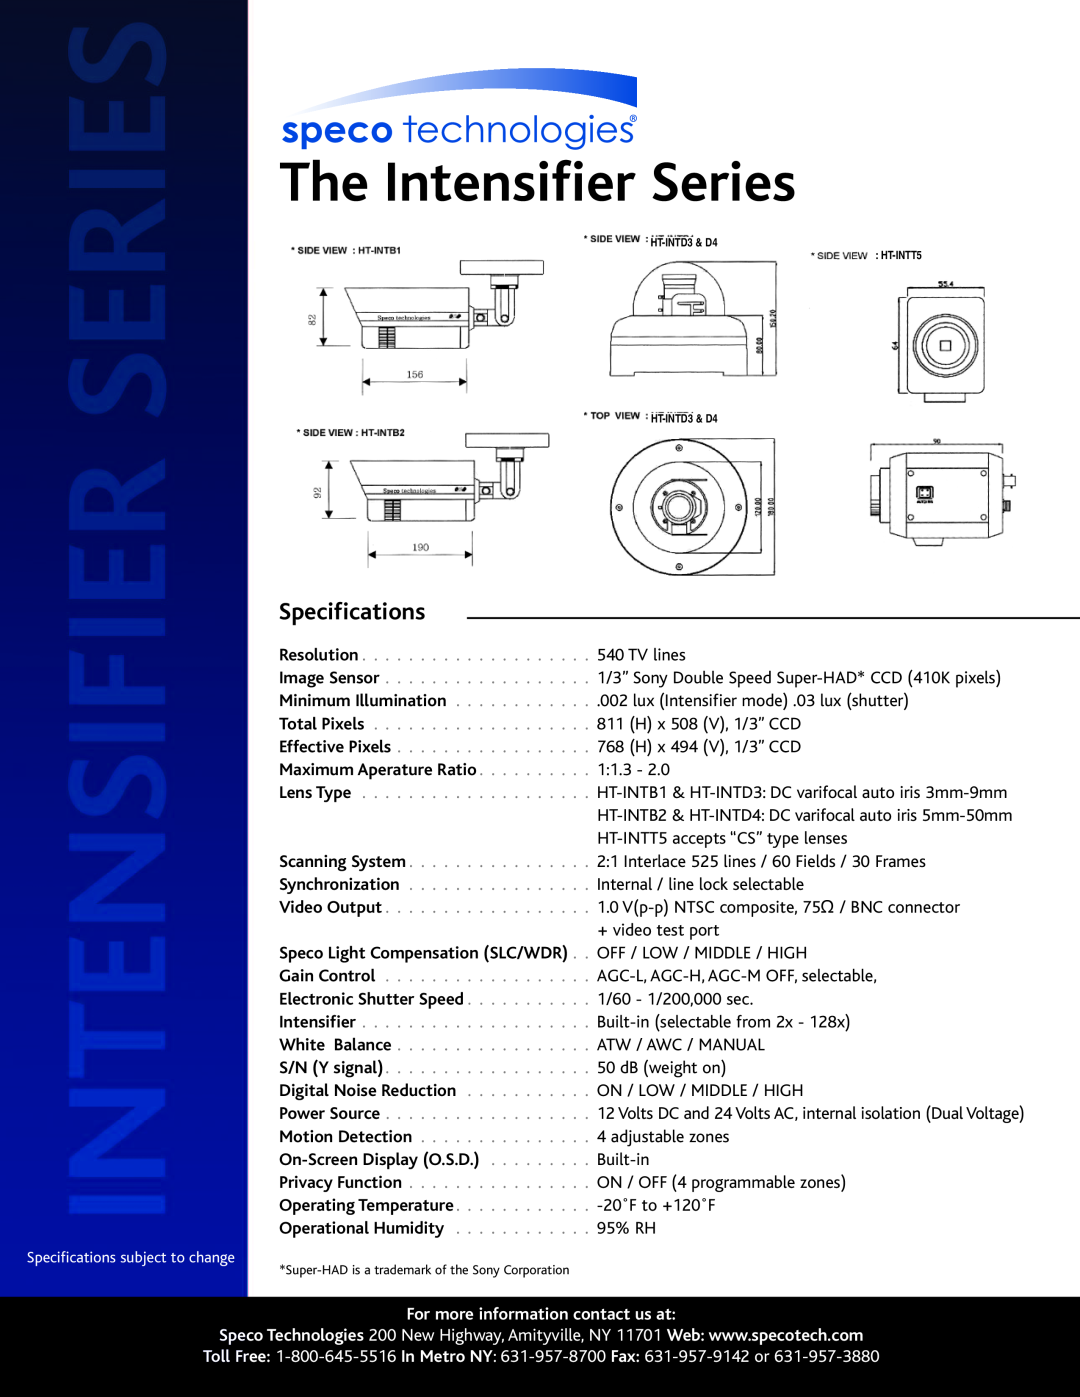 Speco Technologies HT-INTD4, HT-INTB1, HT-INTD3, HT-INTB2 Digital Noise Reduction, The Intensifier Series, Specifications 